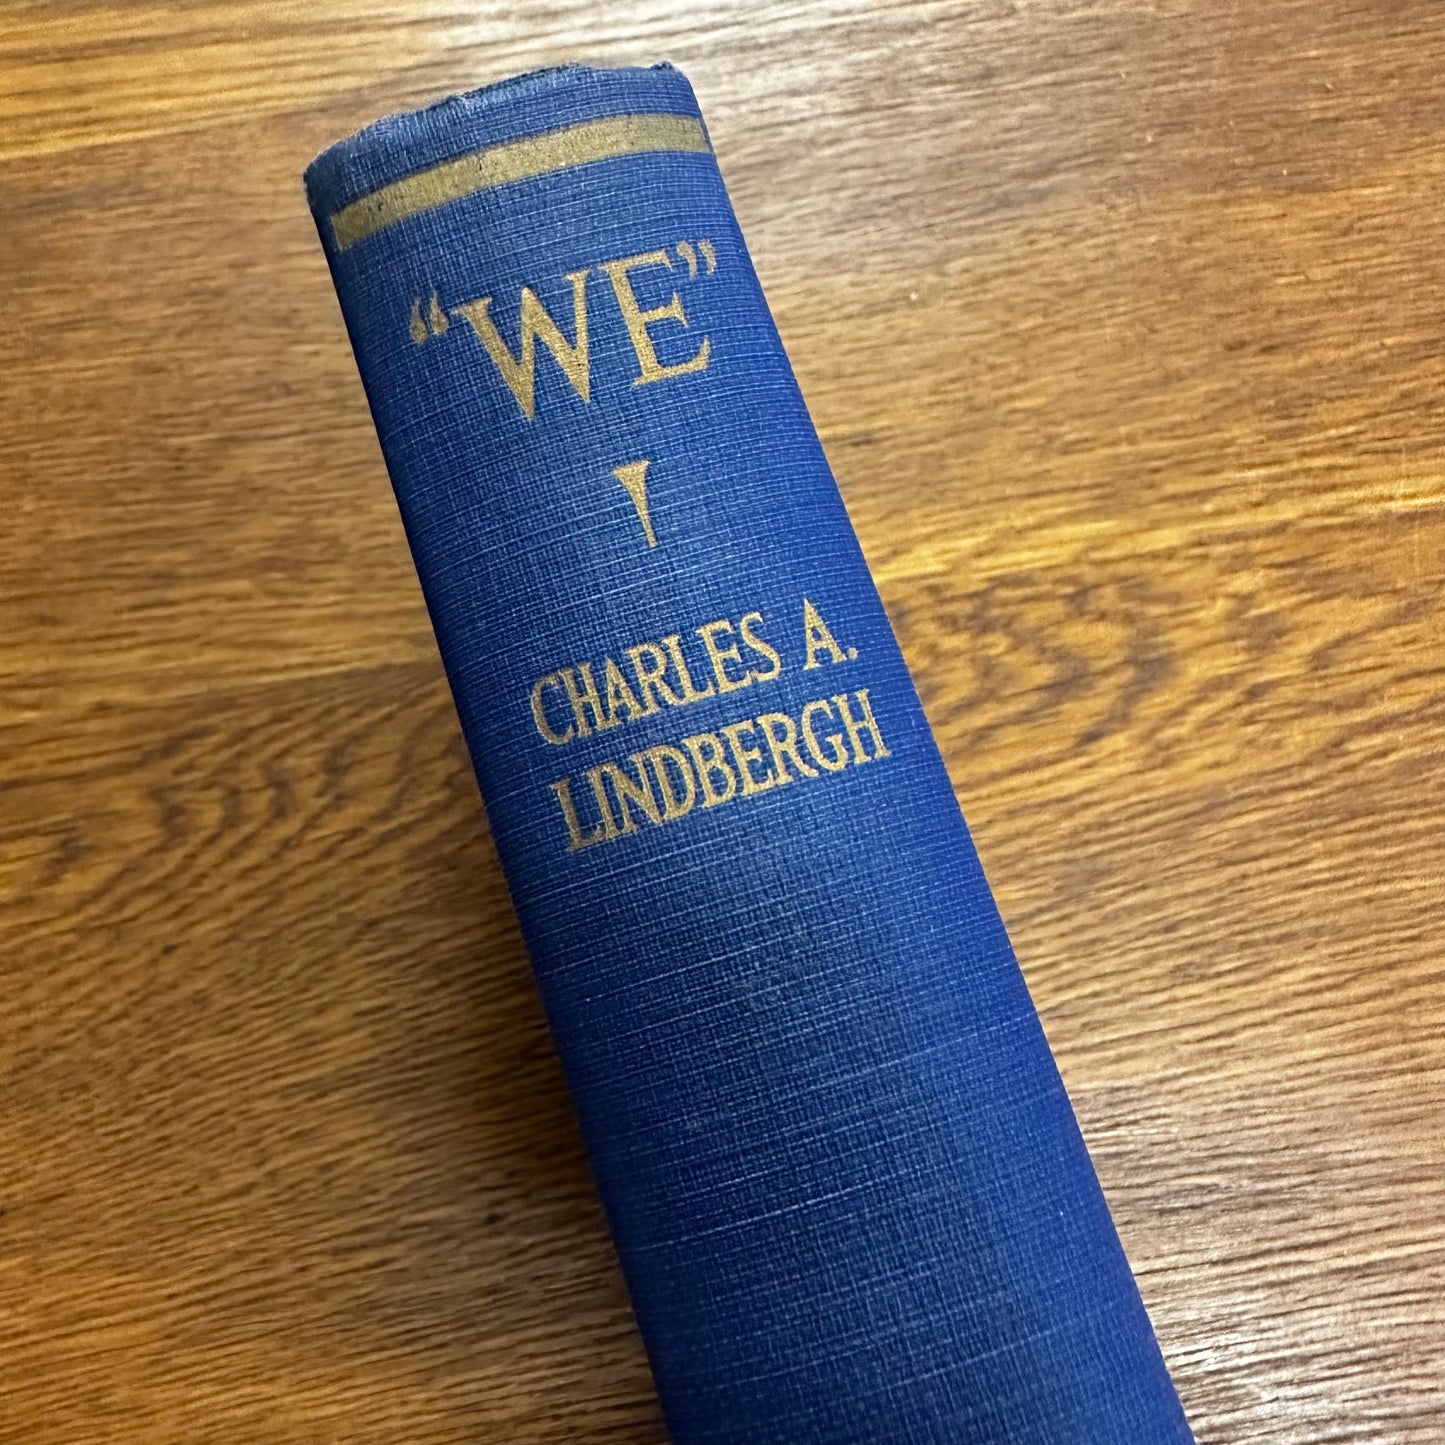 WE by Charles A. Lindbergh First Edition